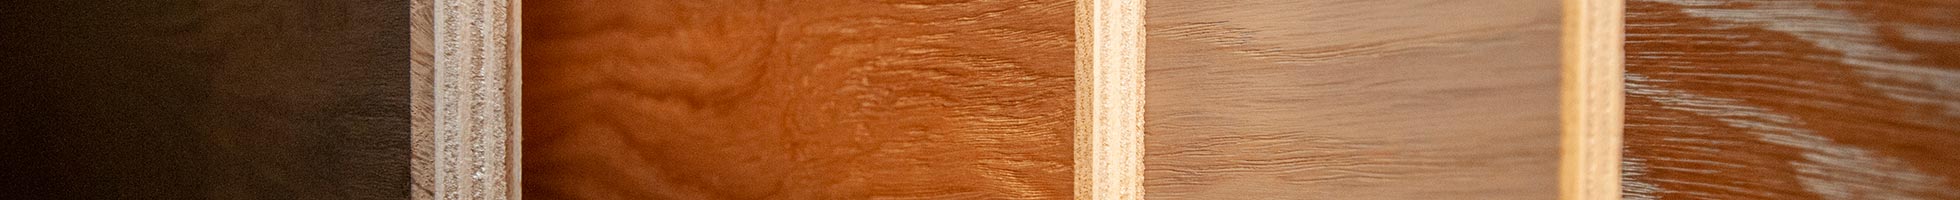 Prefinished Hardwood Flooring, What Is The Best Way To Clean Prefinished Hardwood Floors